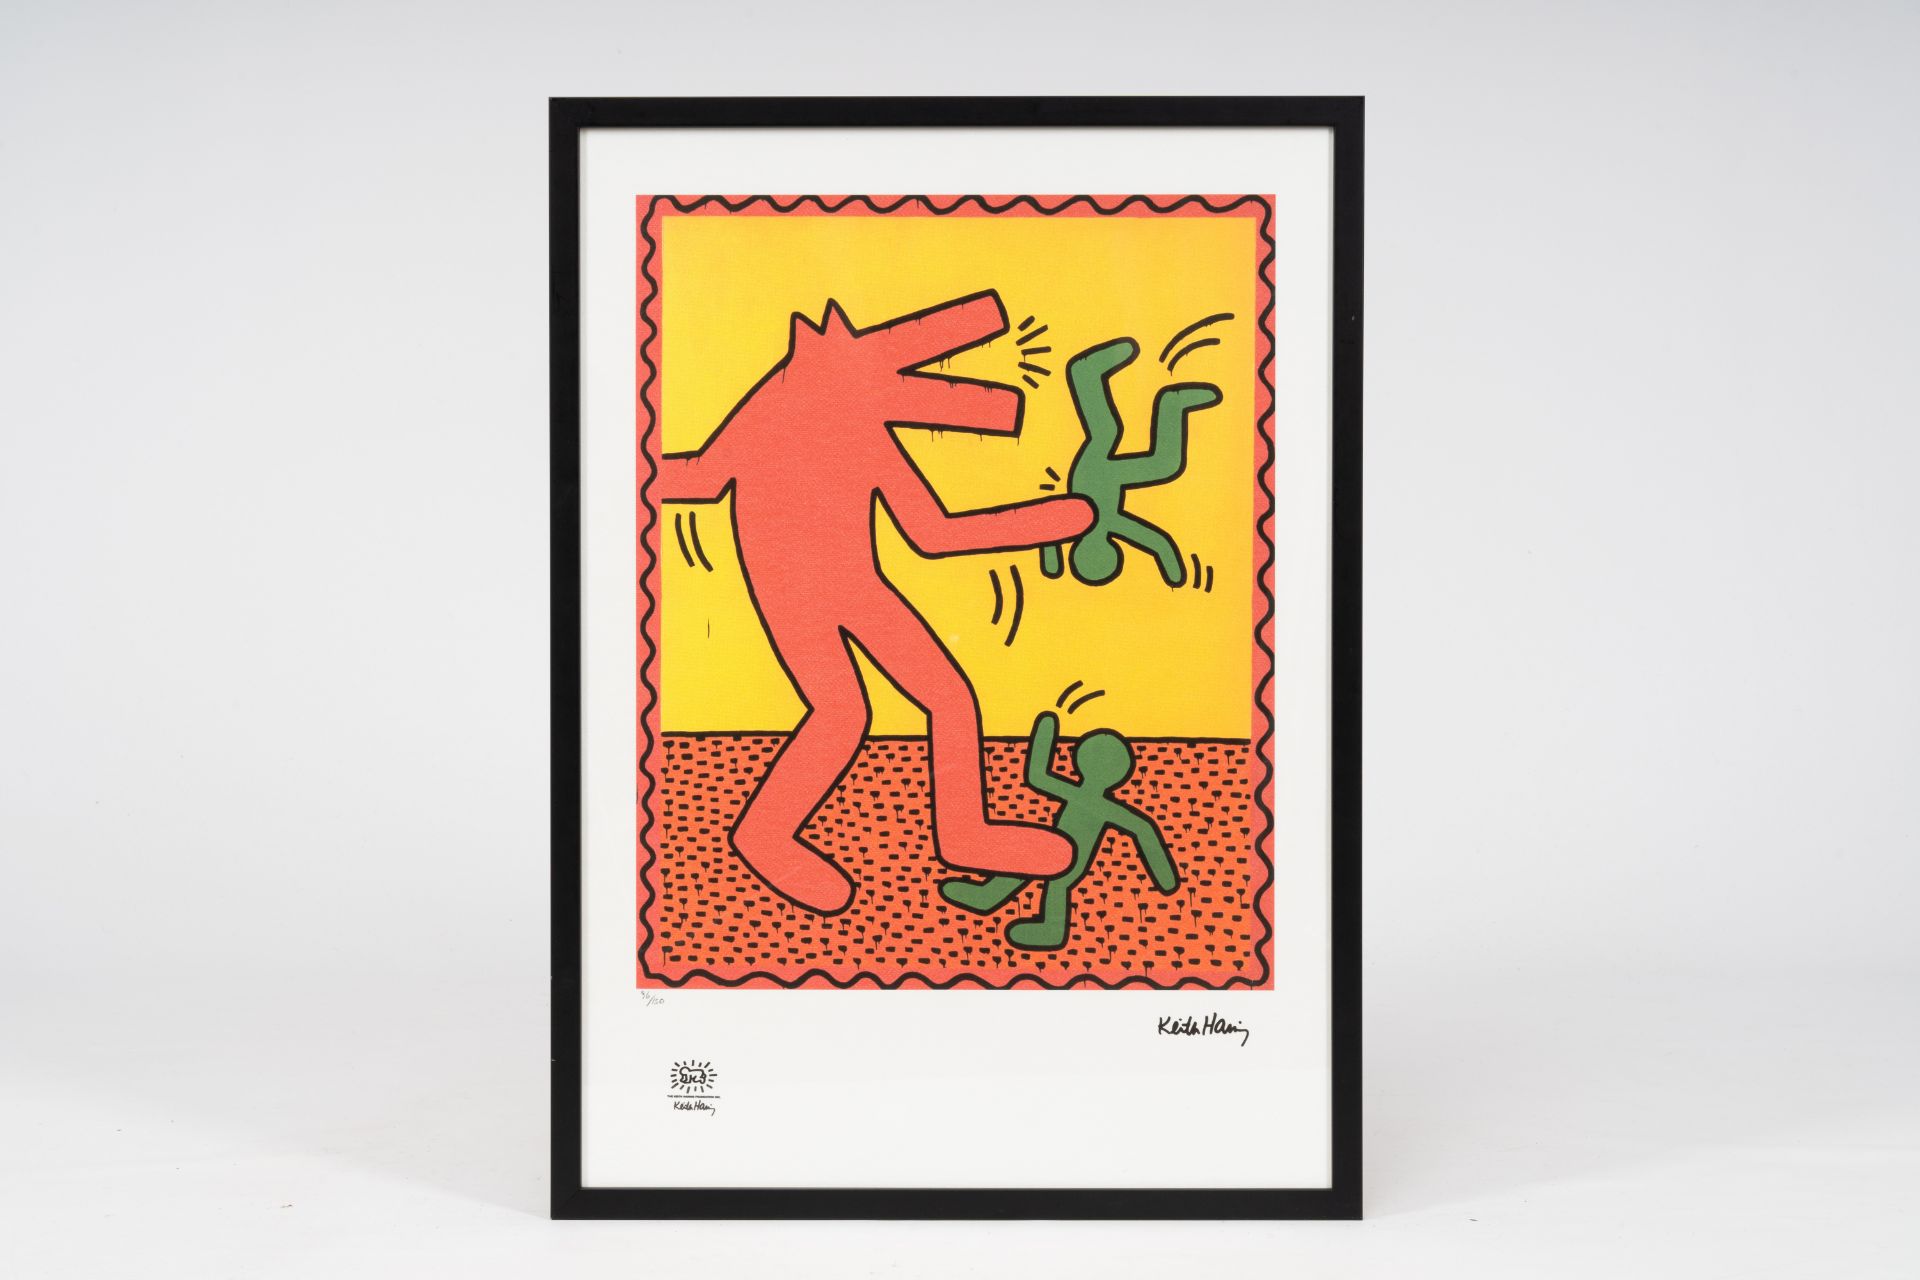 Keith Haring (1958-1990, after): 'Red dog', multiple, ed. 96/150 - Image 2 of 7